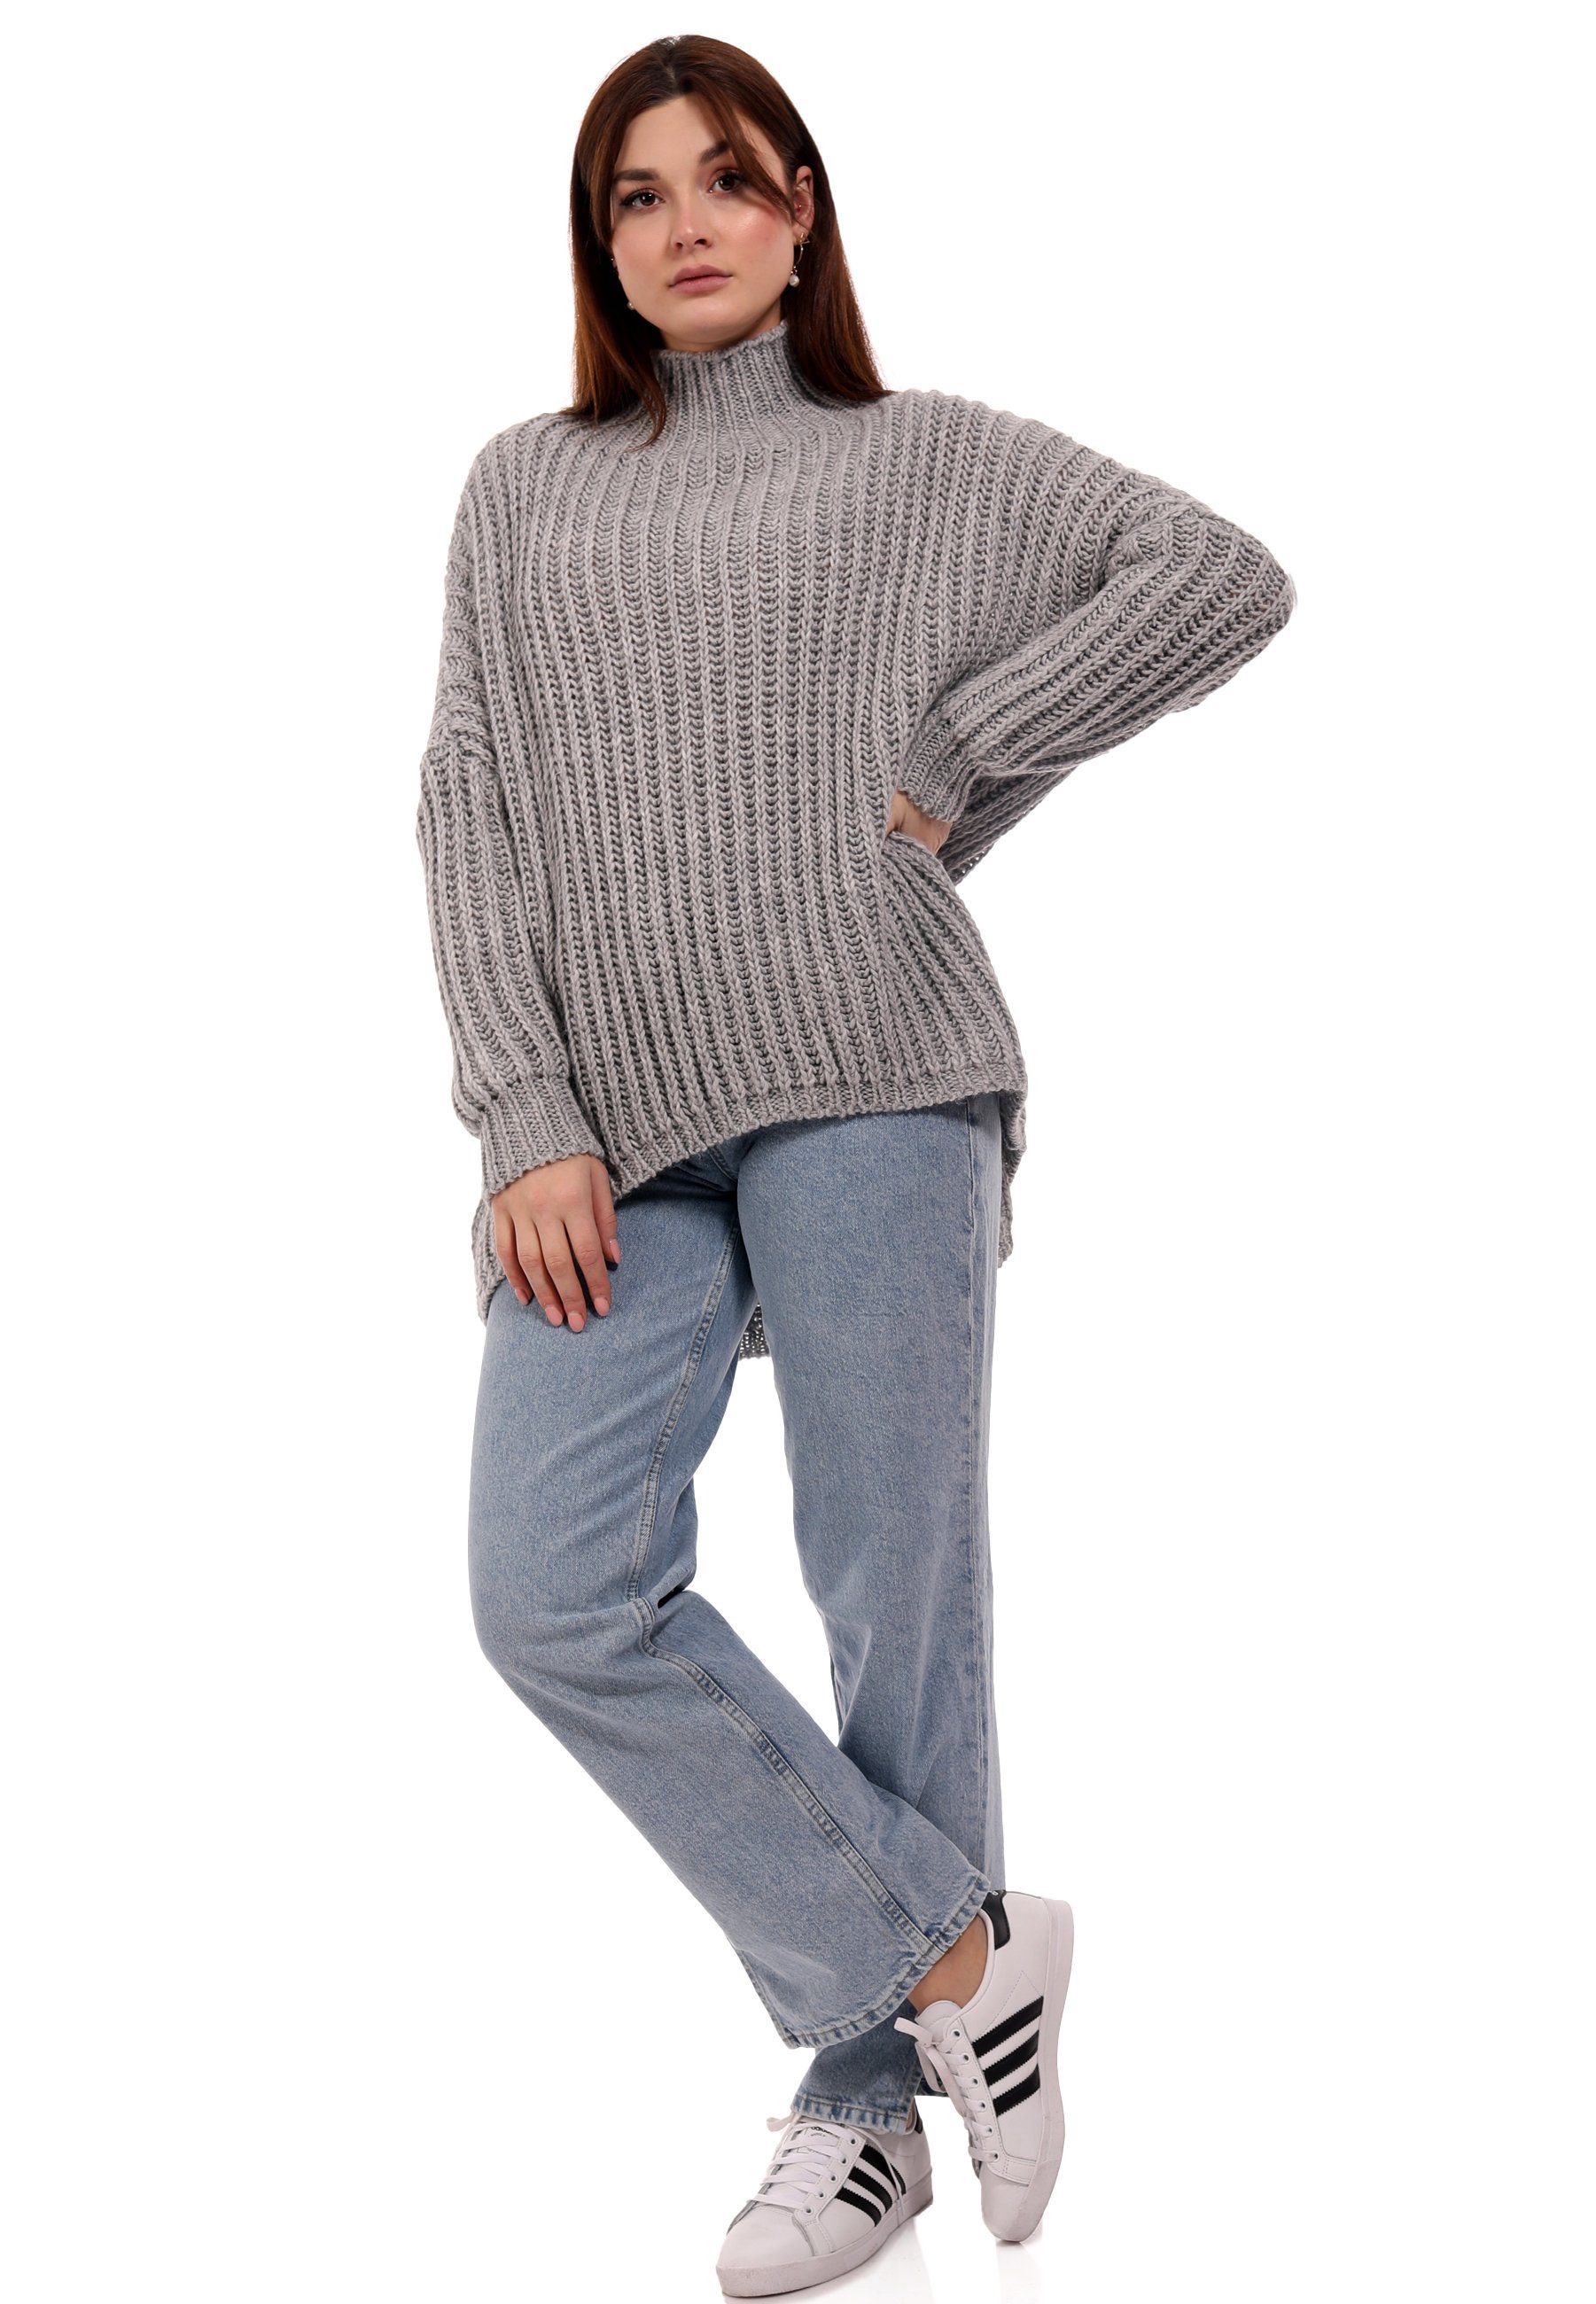 Oversized & One Size casual Fashion YC Longpullover grau Vokuhila (1-tlg) Pullover Sweater Grobstrick Style